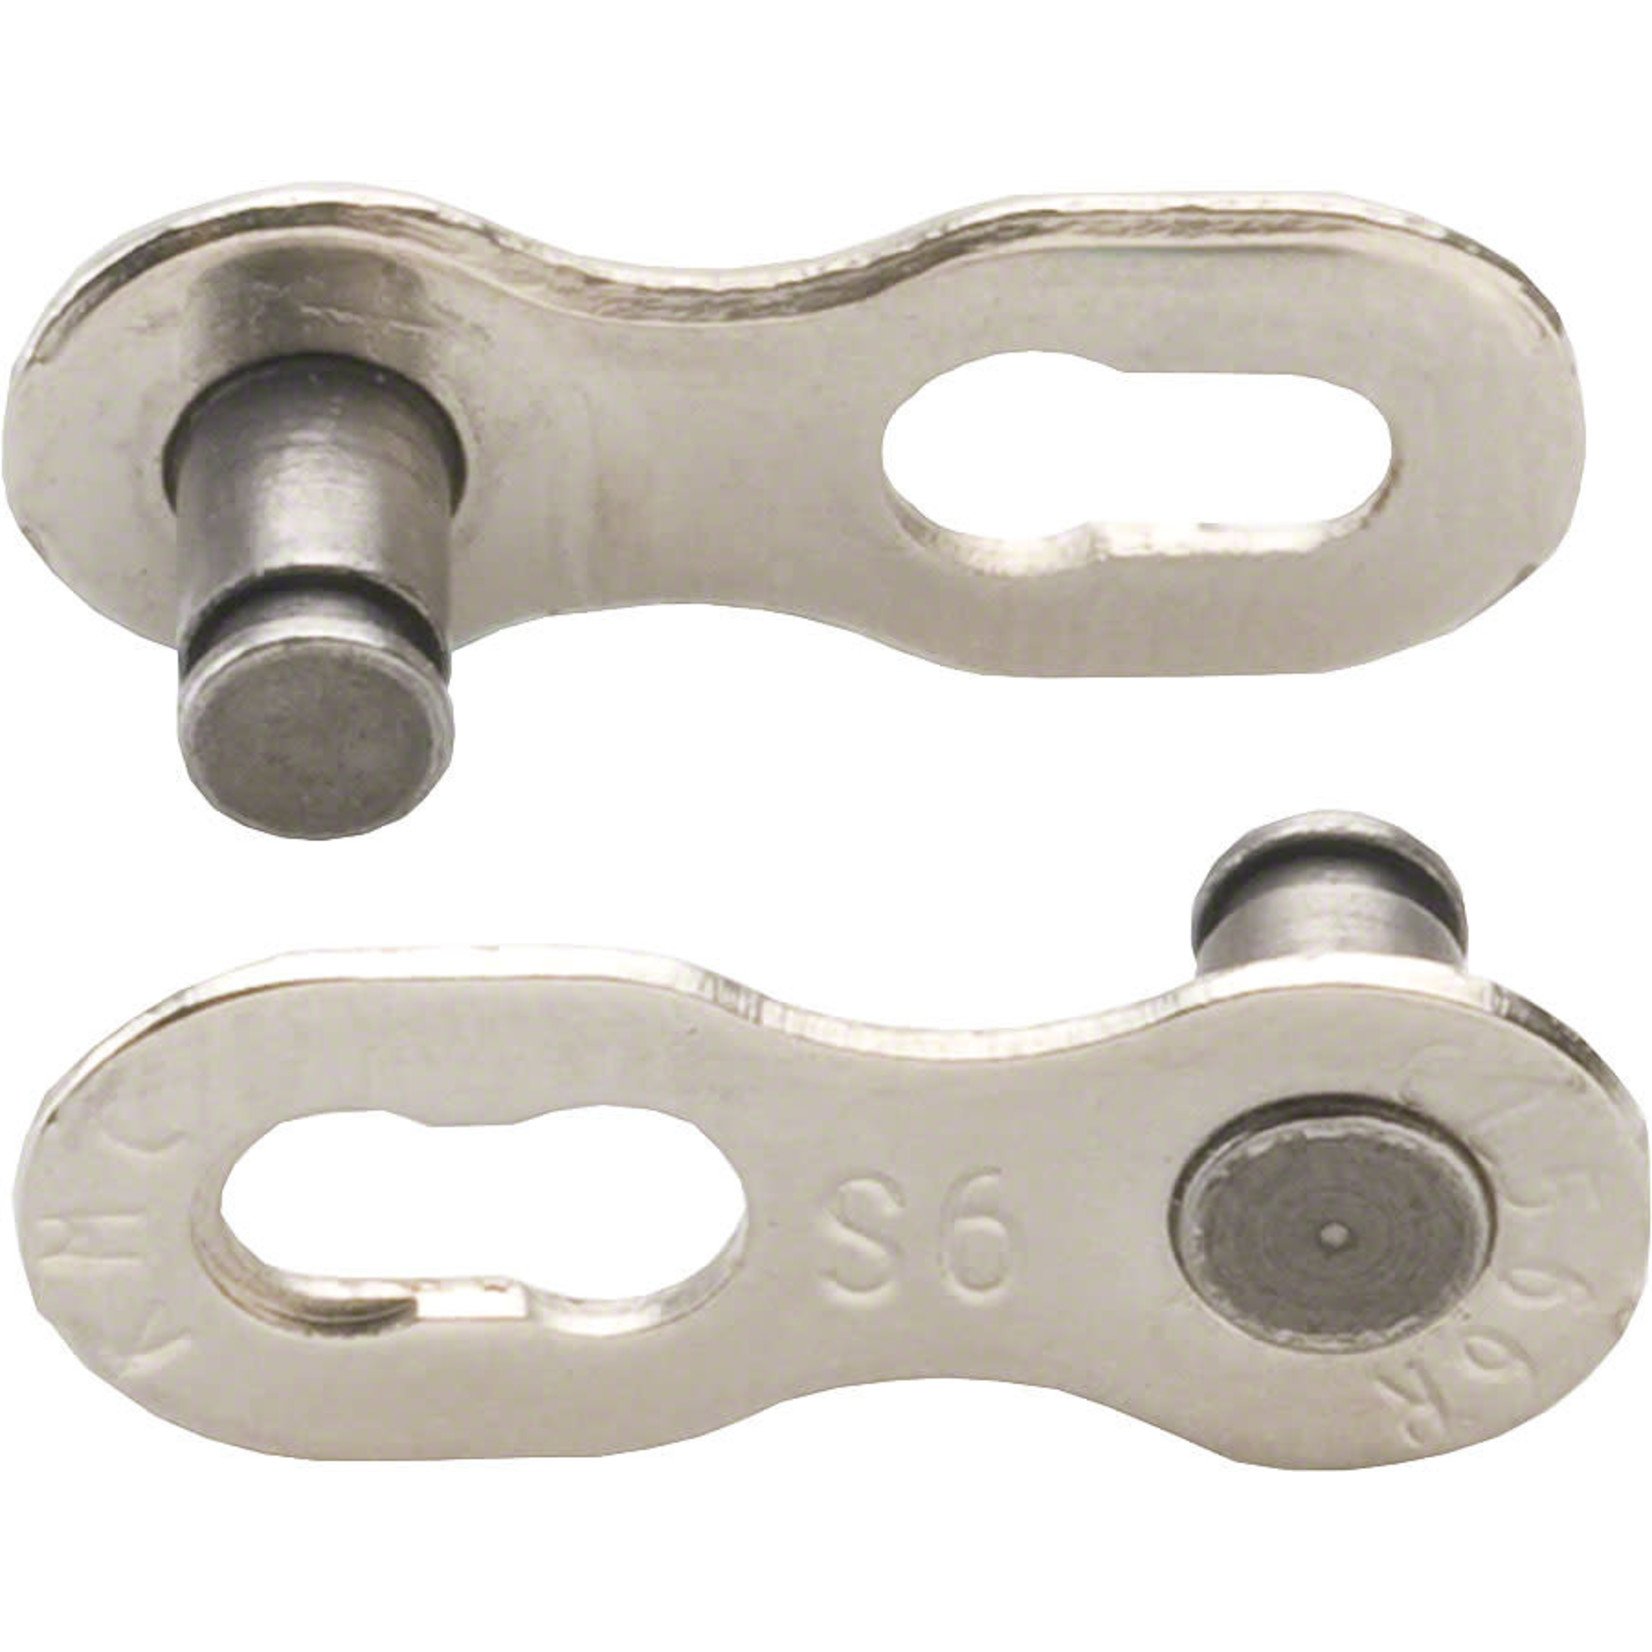 KMC KMC Missing Link Fits 6.6mm (9-speed) Chains single